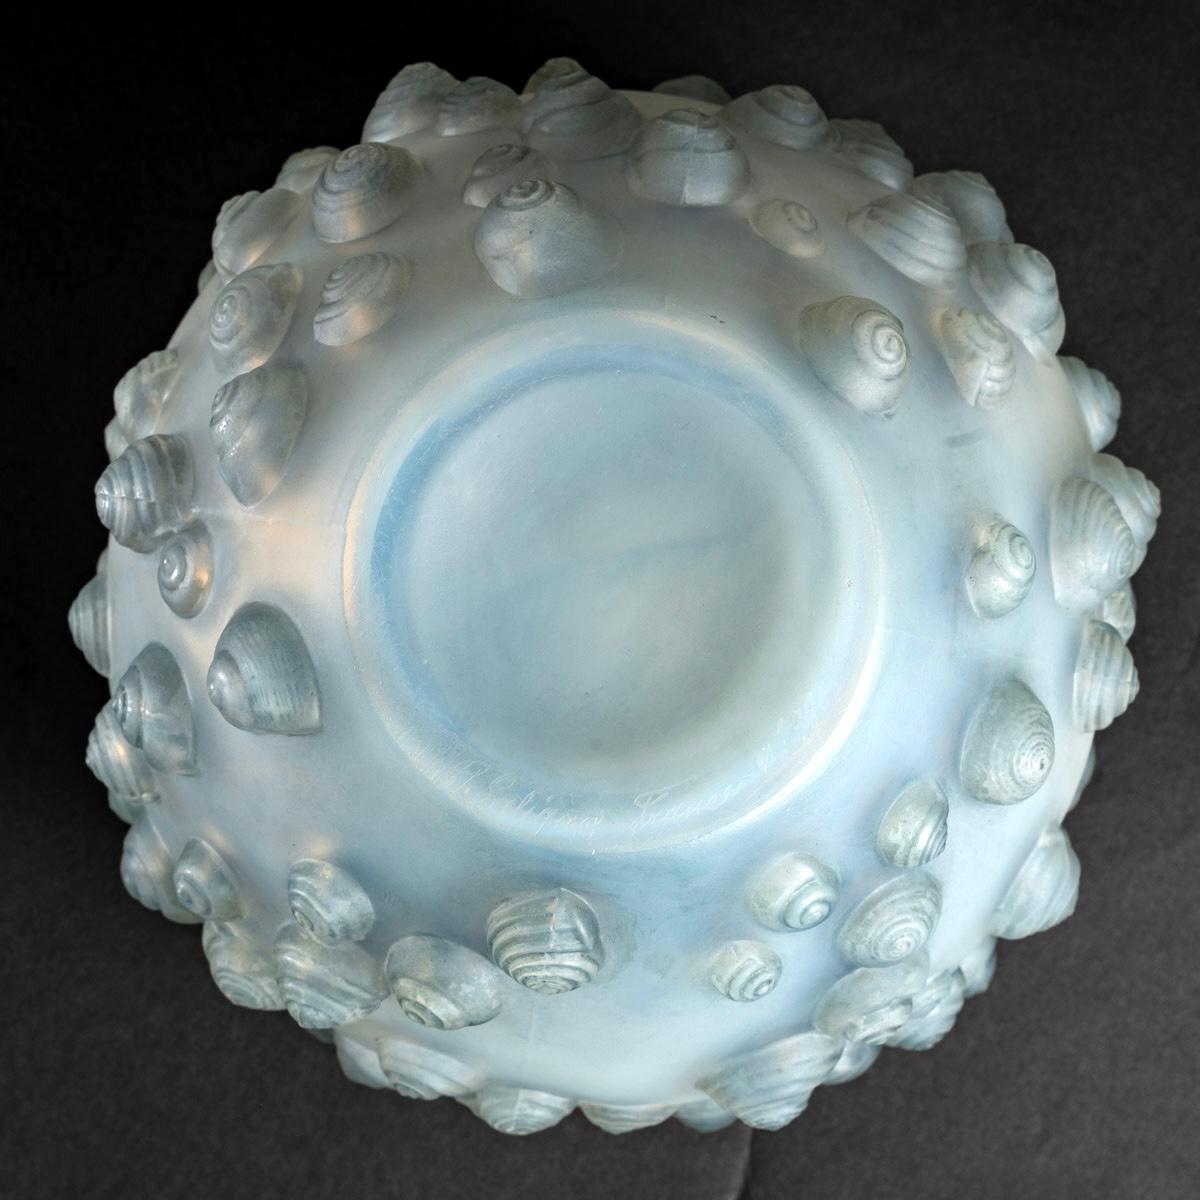 Molded 1926 René Lalique - Vase Palissy Double Cased Opalescent Glass with Blue Patina